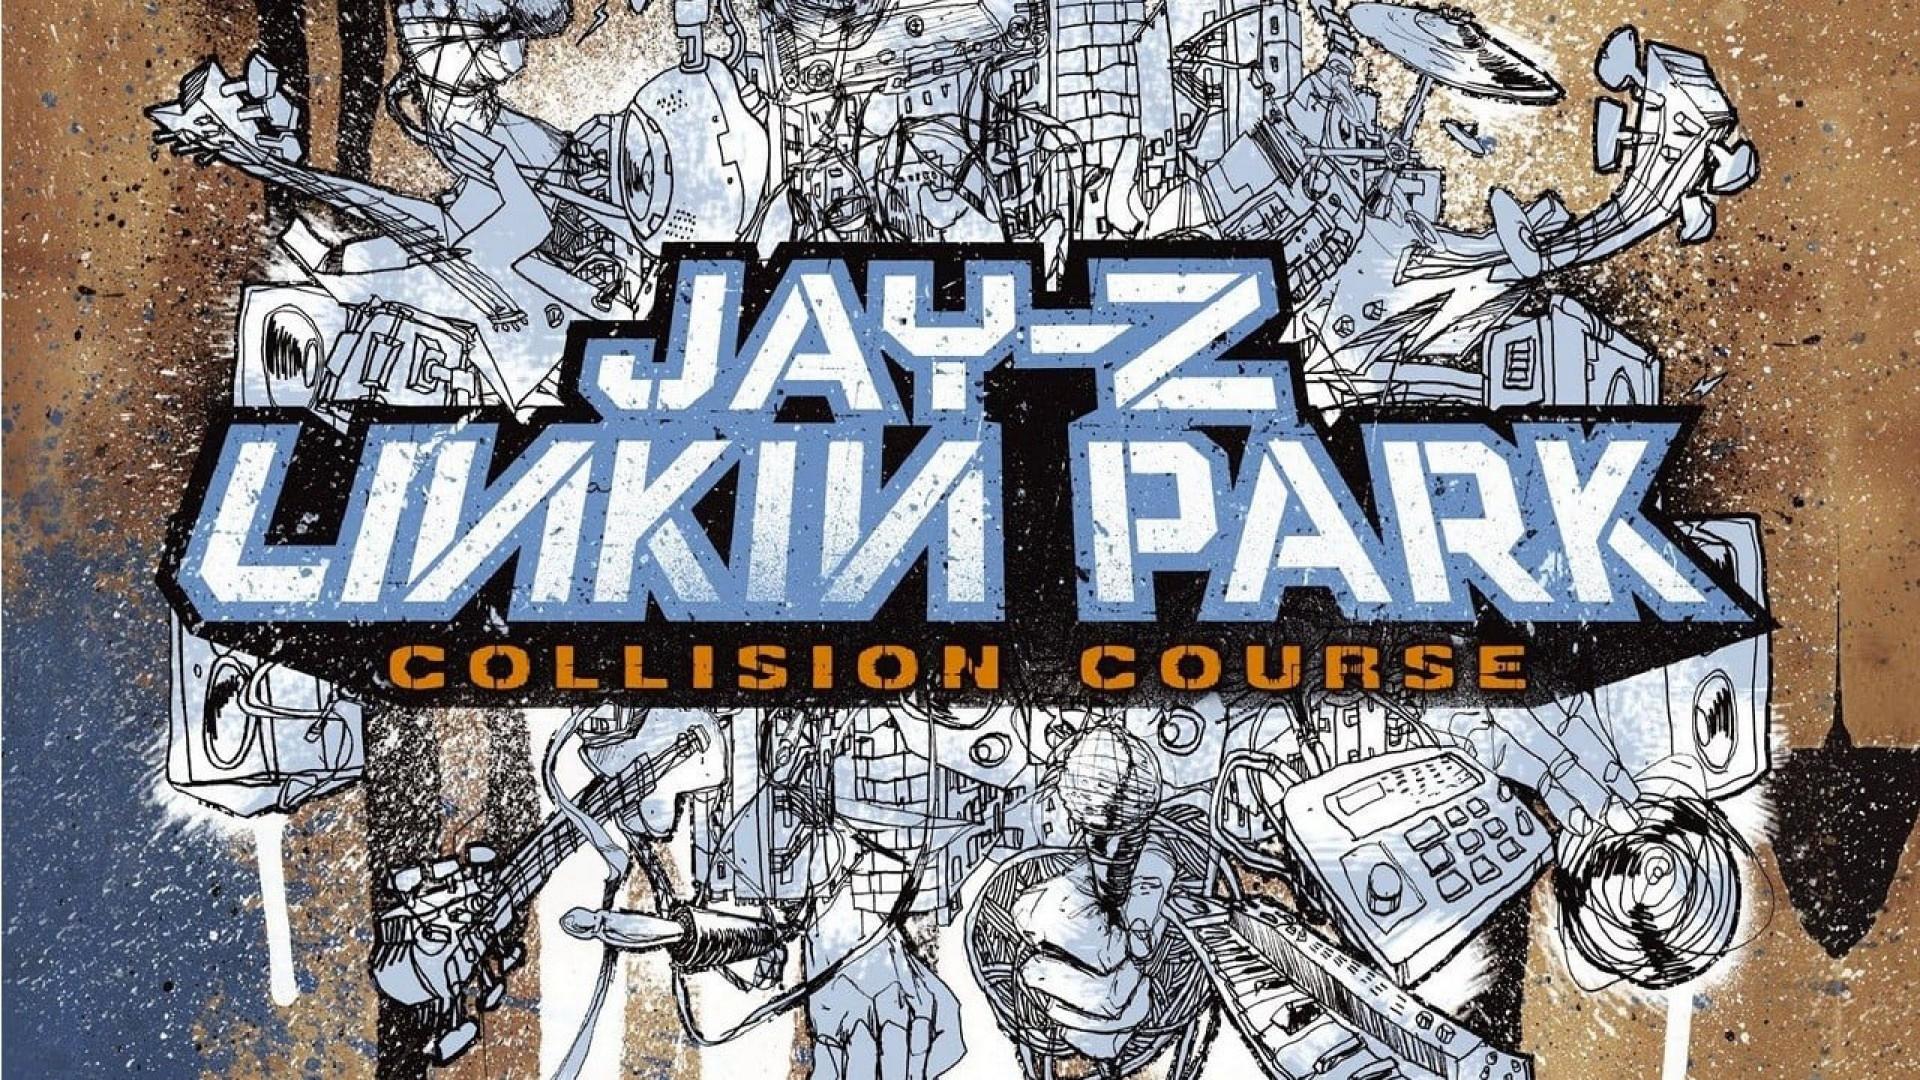 Collision Course Jay-Z and Linkin Park